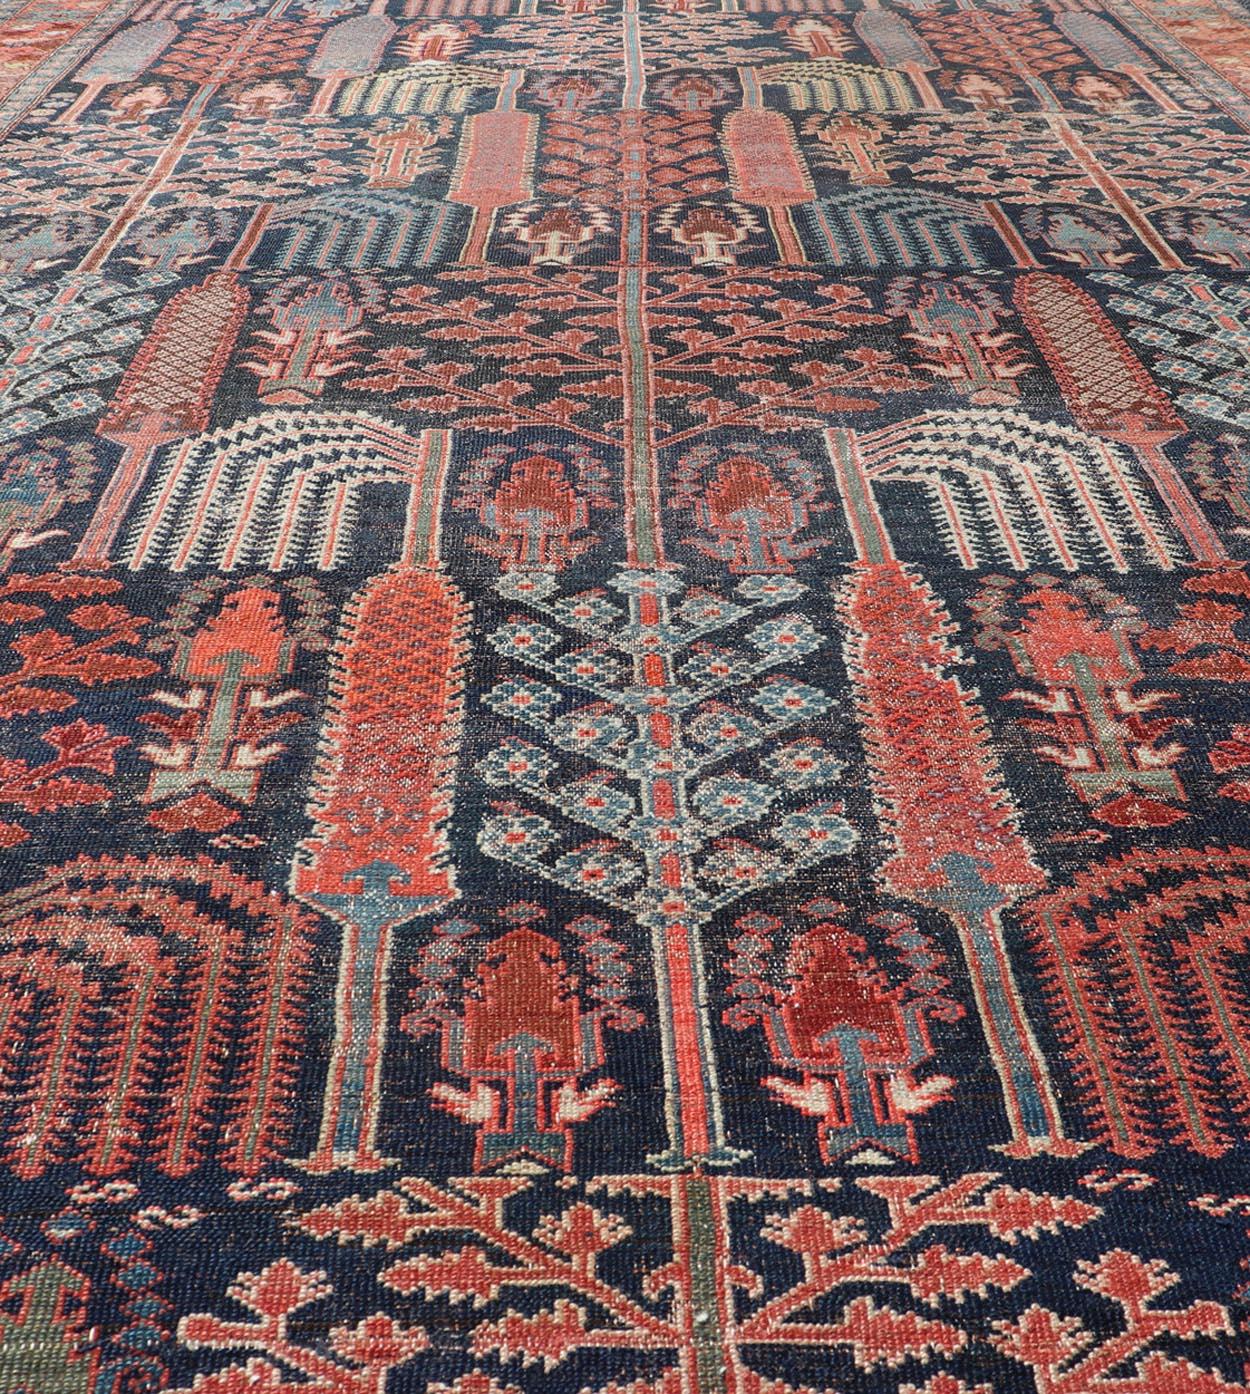 Antique Persian Bakhshaish Rug with All-Over Tree and Willow Design For Sale 5